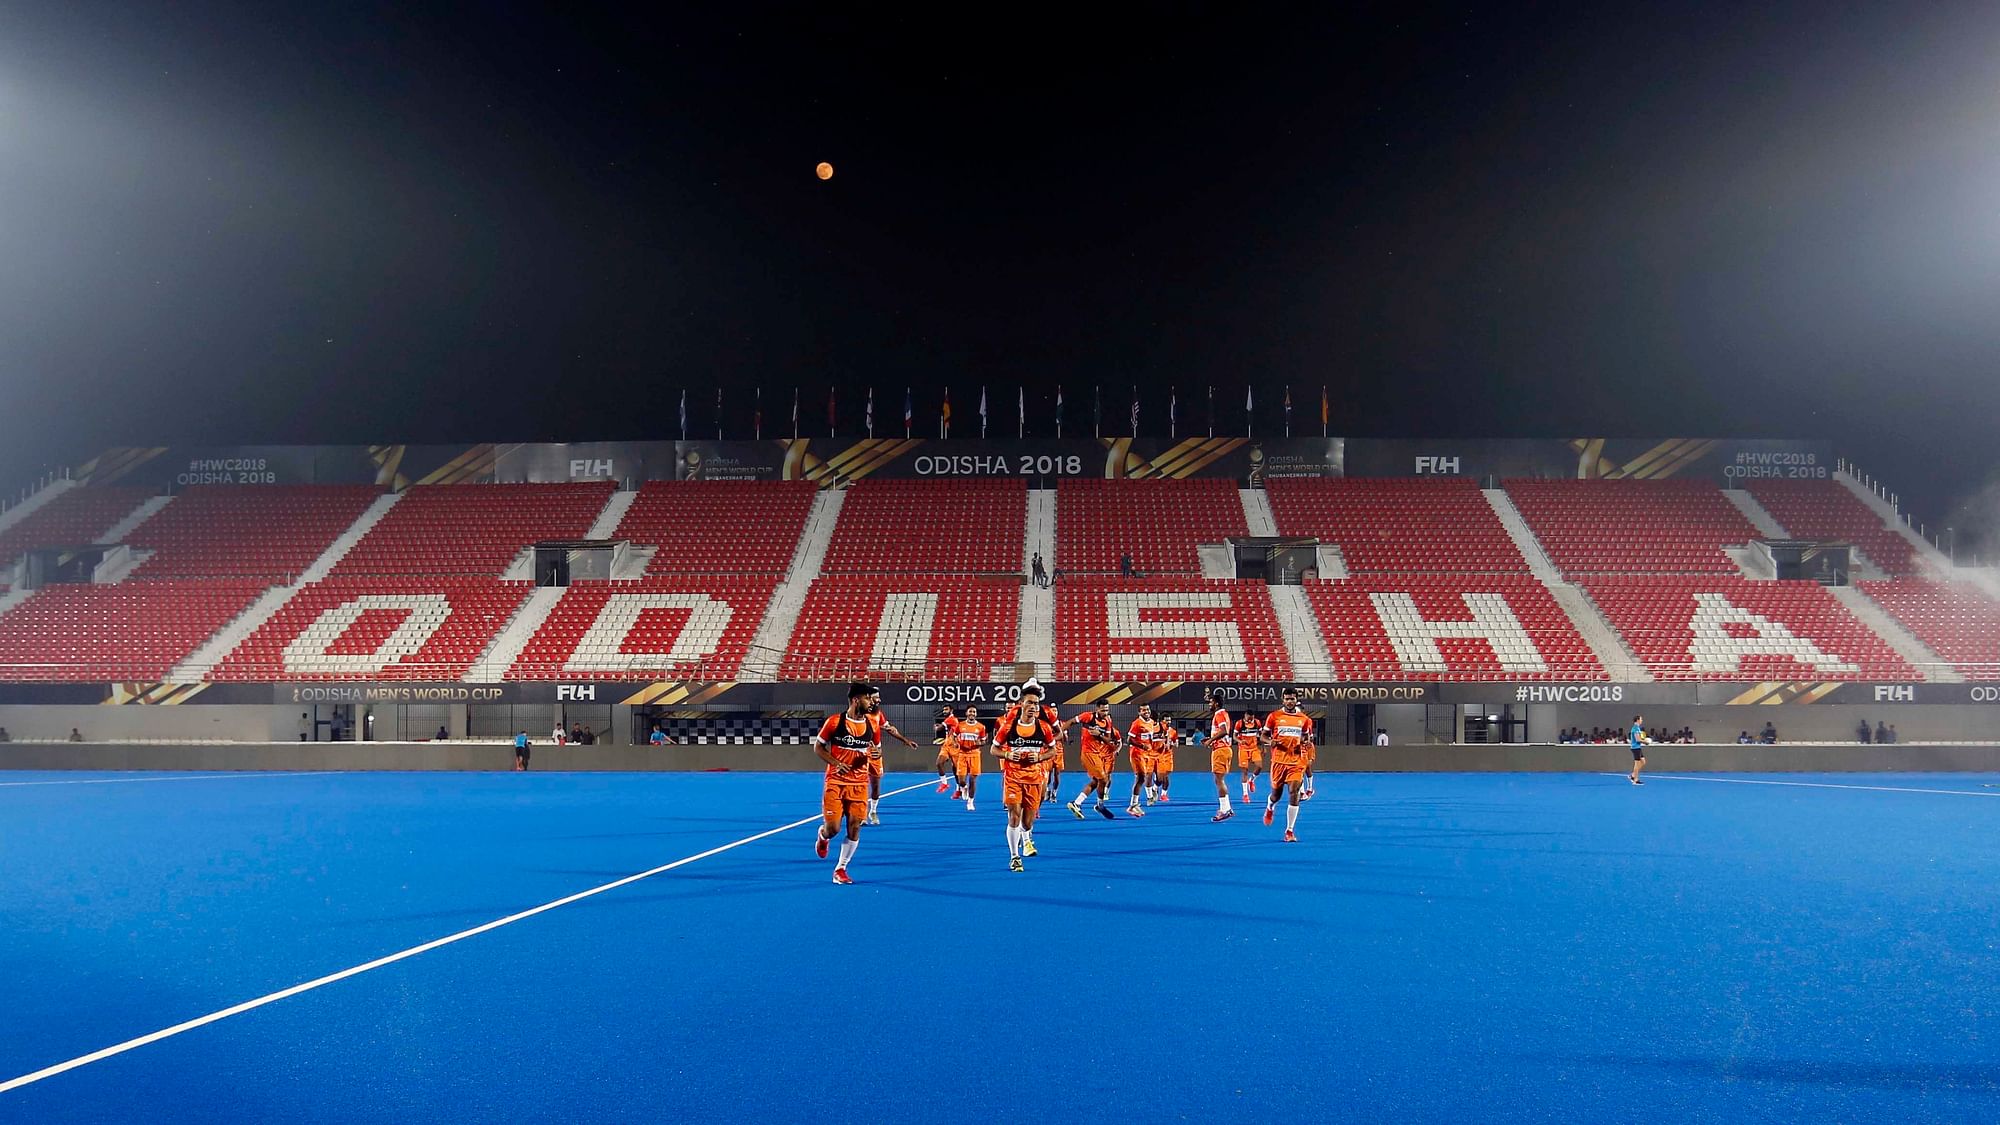 The hockey men’s World Cup – the 14th edition of the prestigious tournament – is set to kick-off in Bhubaneswar on 28 November.